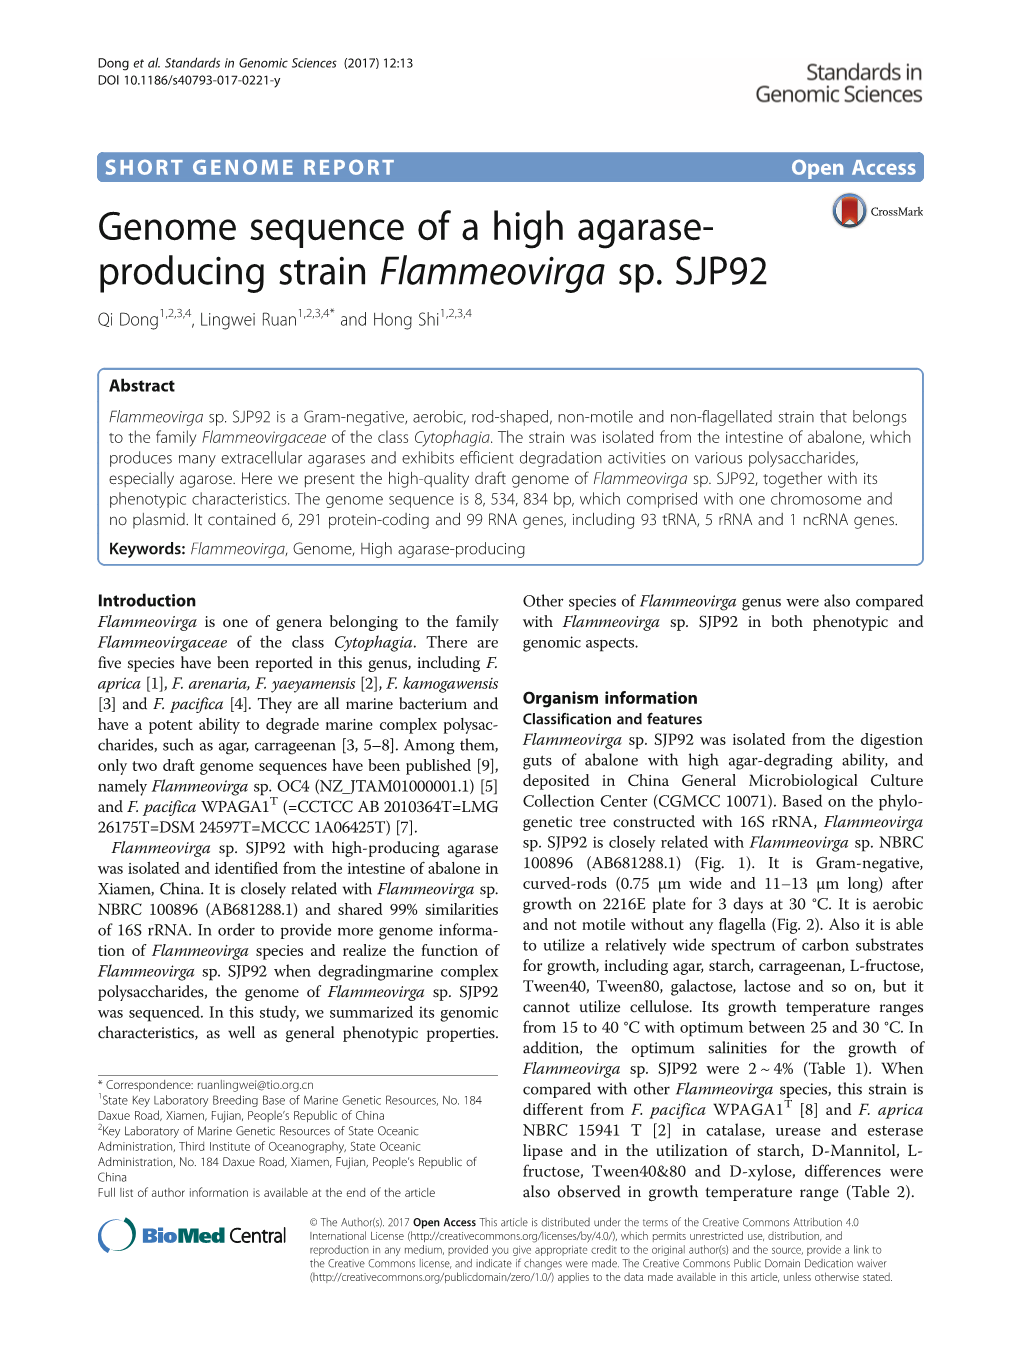 Genome Sequence of a High Agarase-Producing Strain